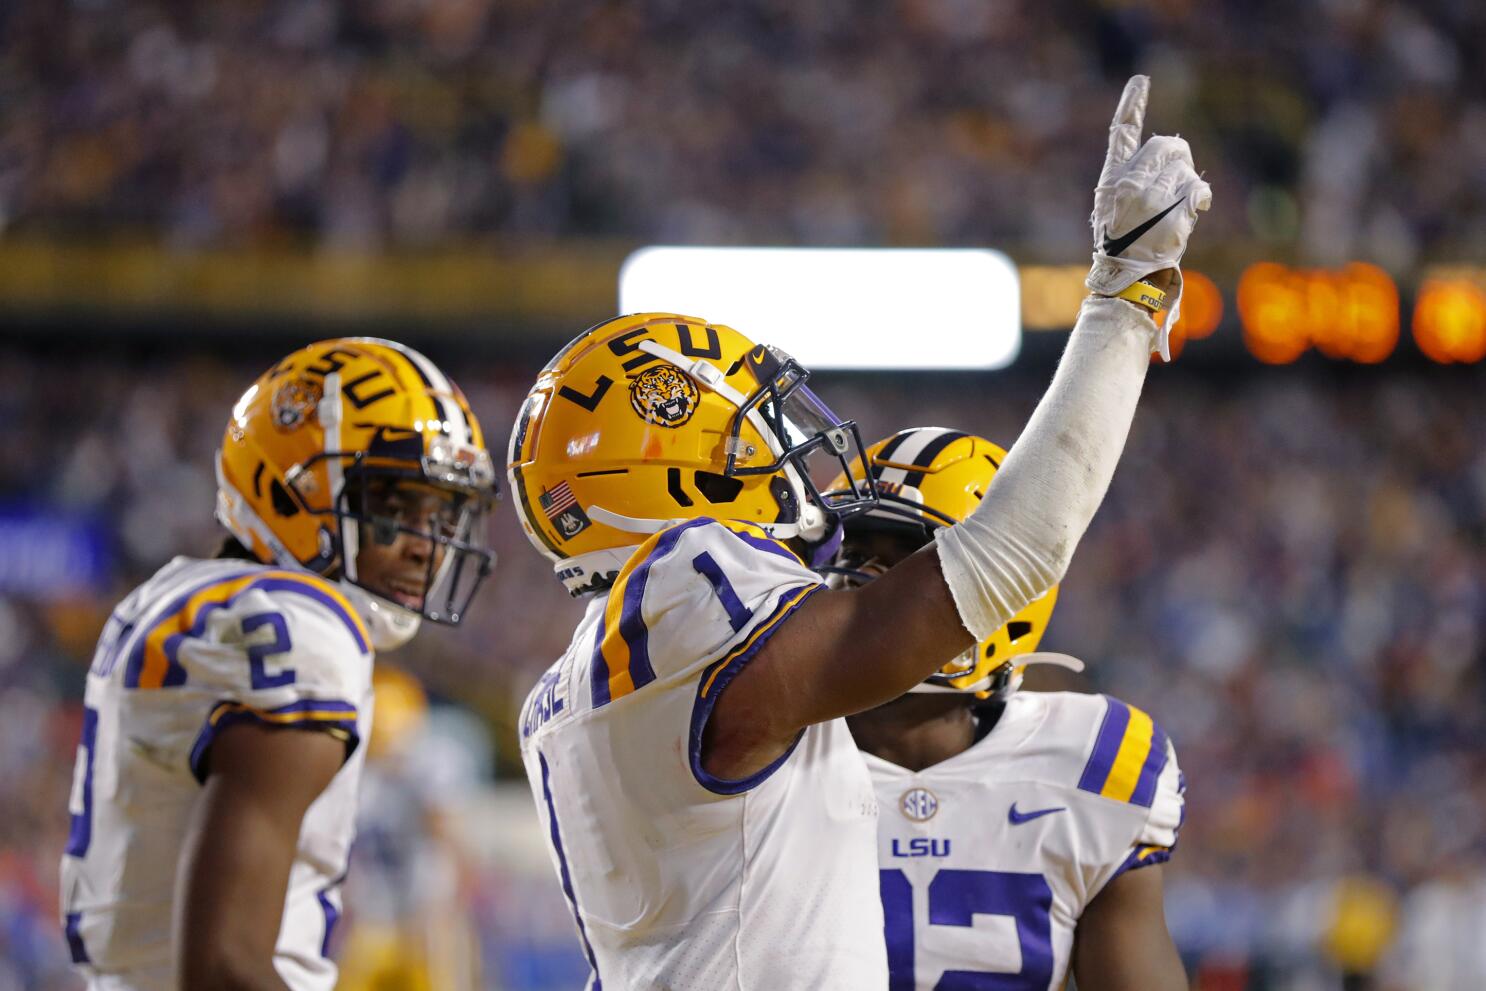 LSU moves up to No. 2 in AP college football poll - Los Angeles Times